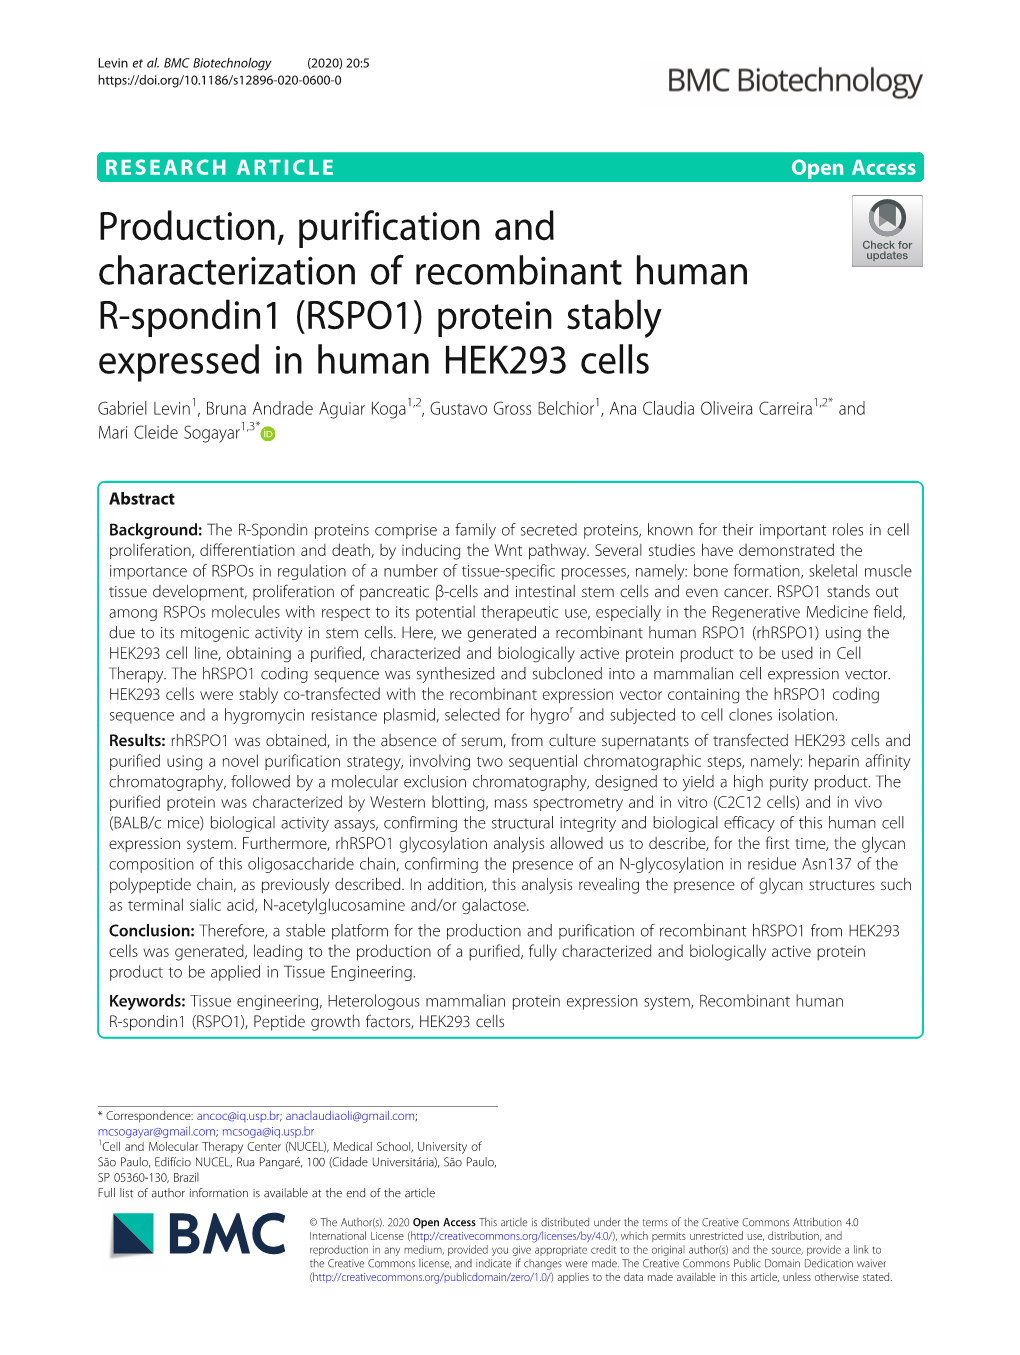 (RSPO1) Protein Stably Expressed in Human